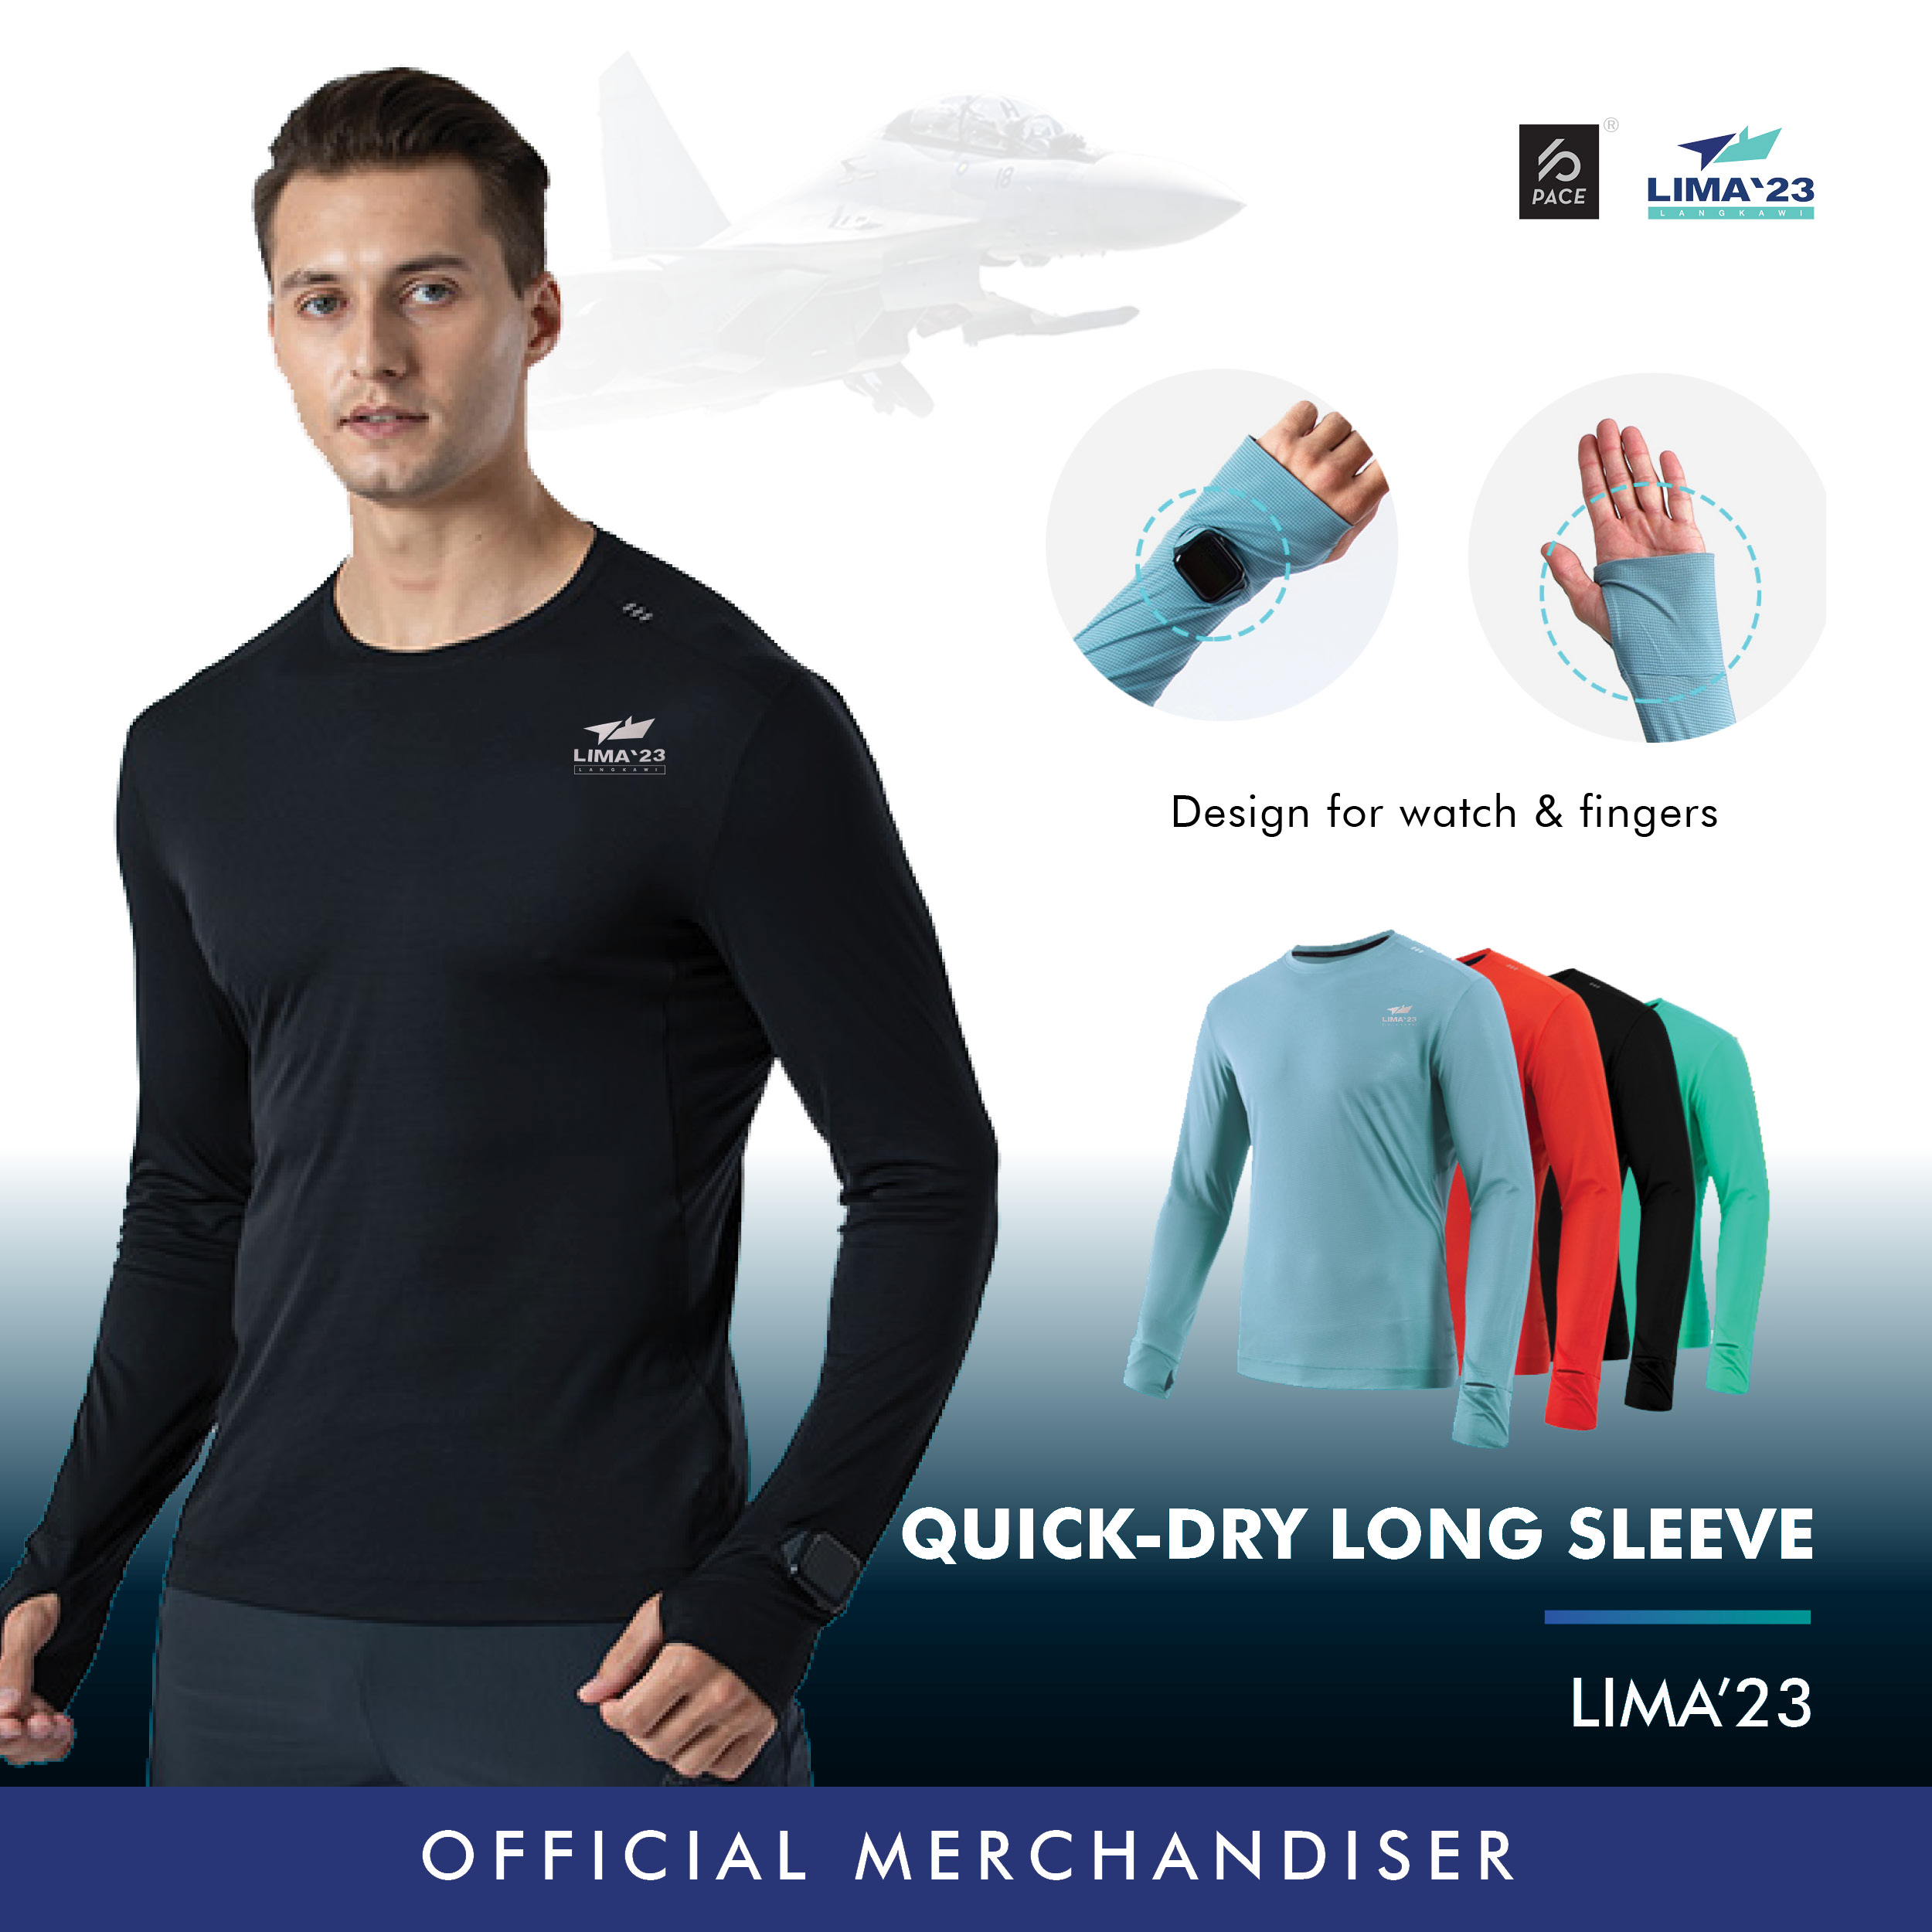 LIMA'23 Quick-Dry Long Sleeve